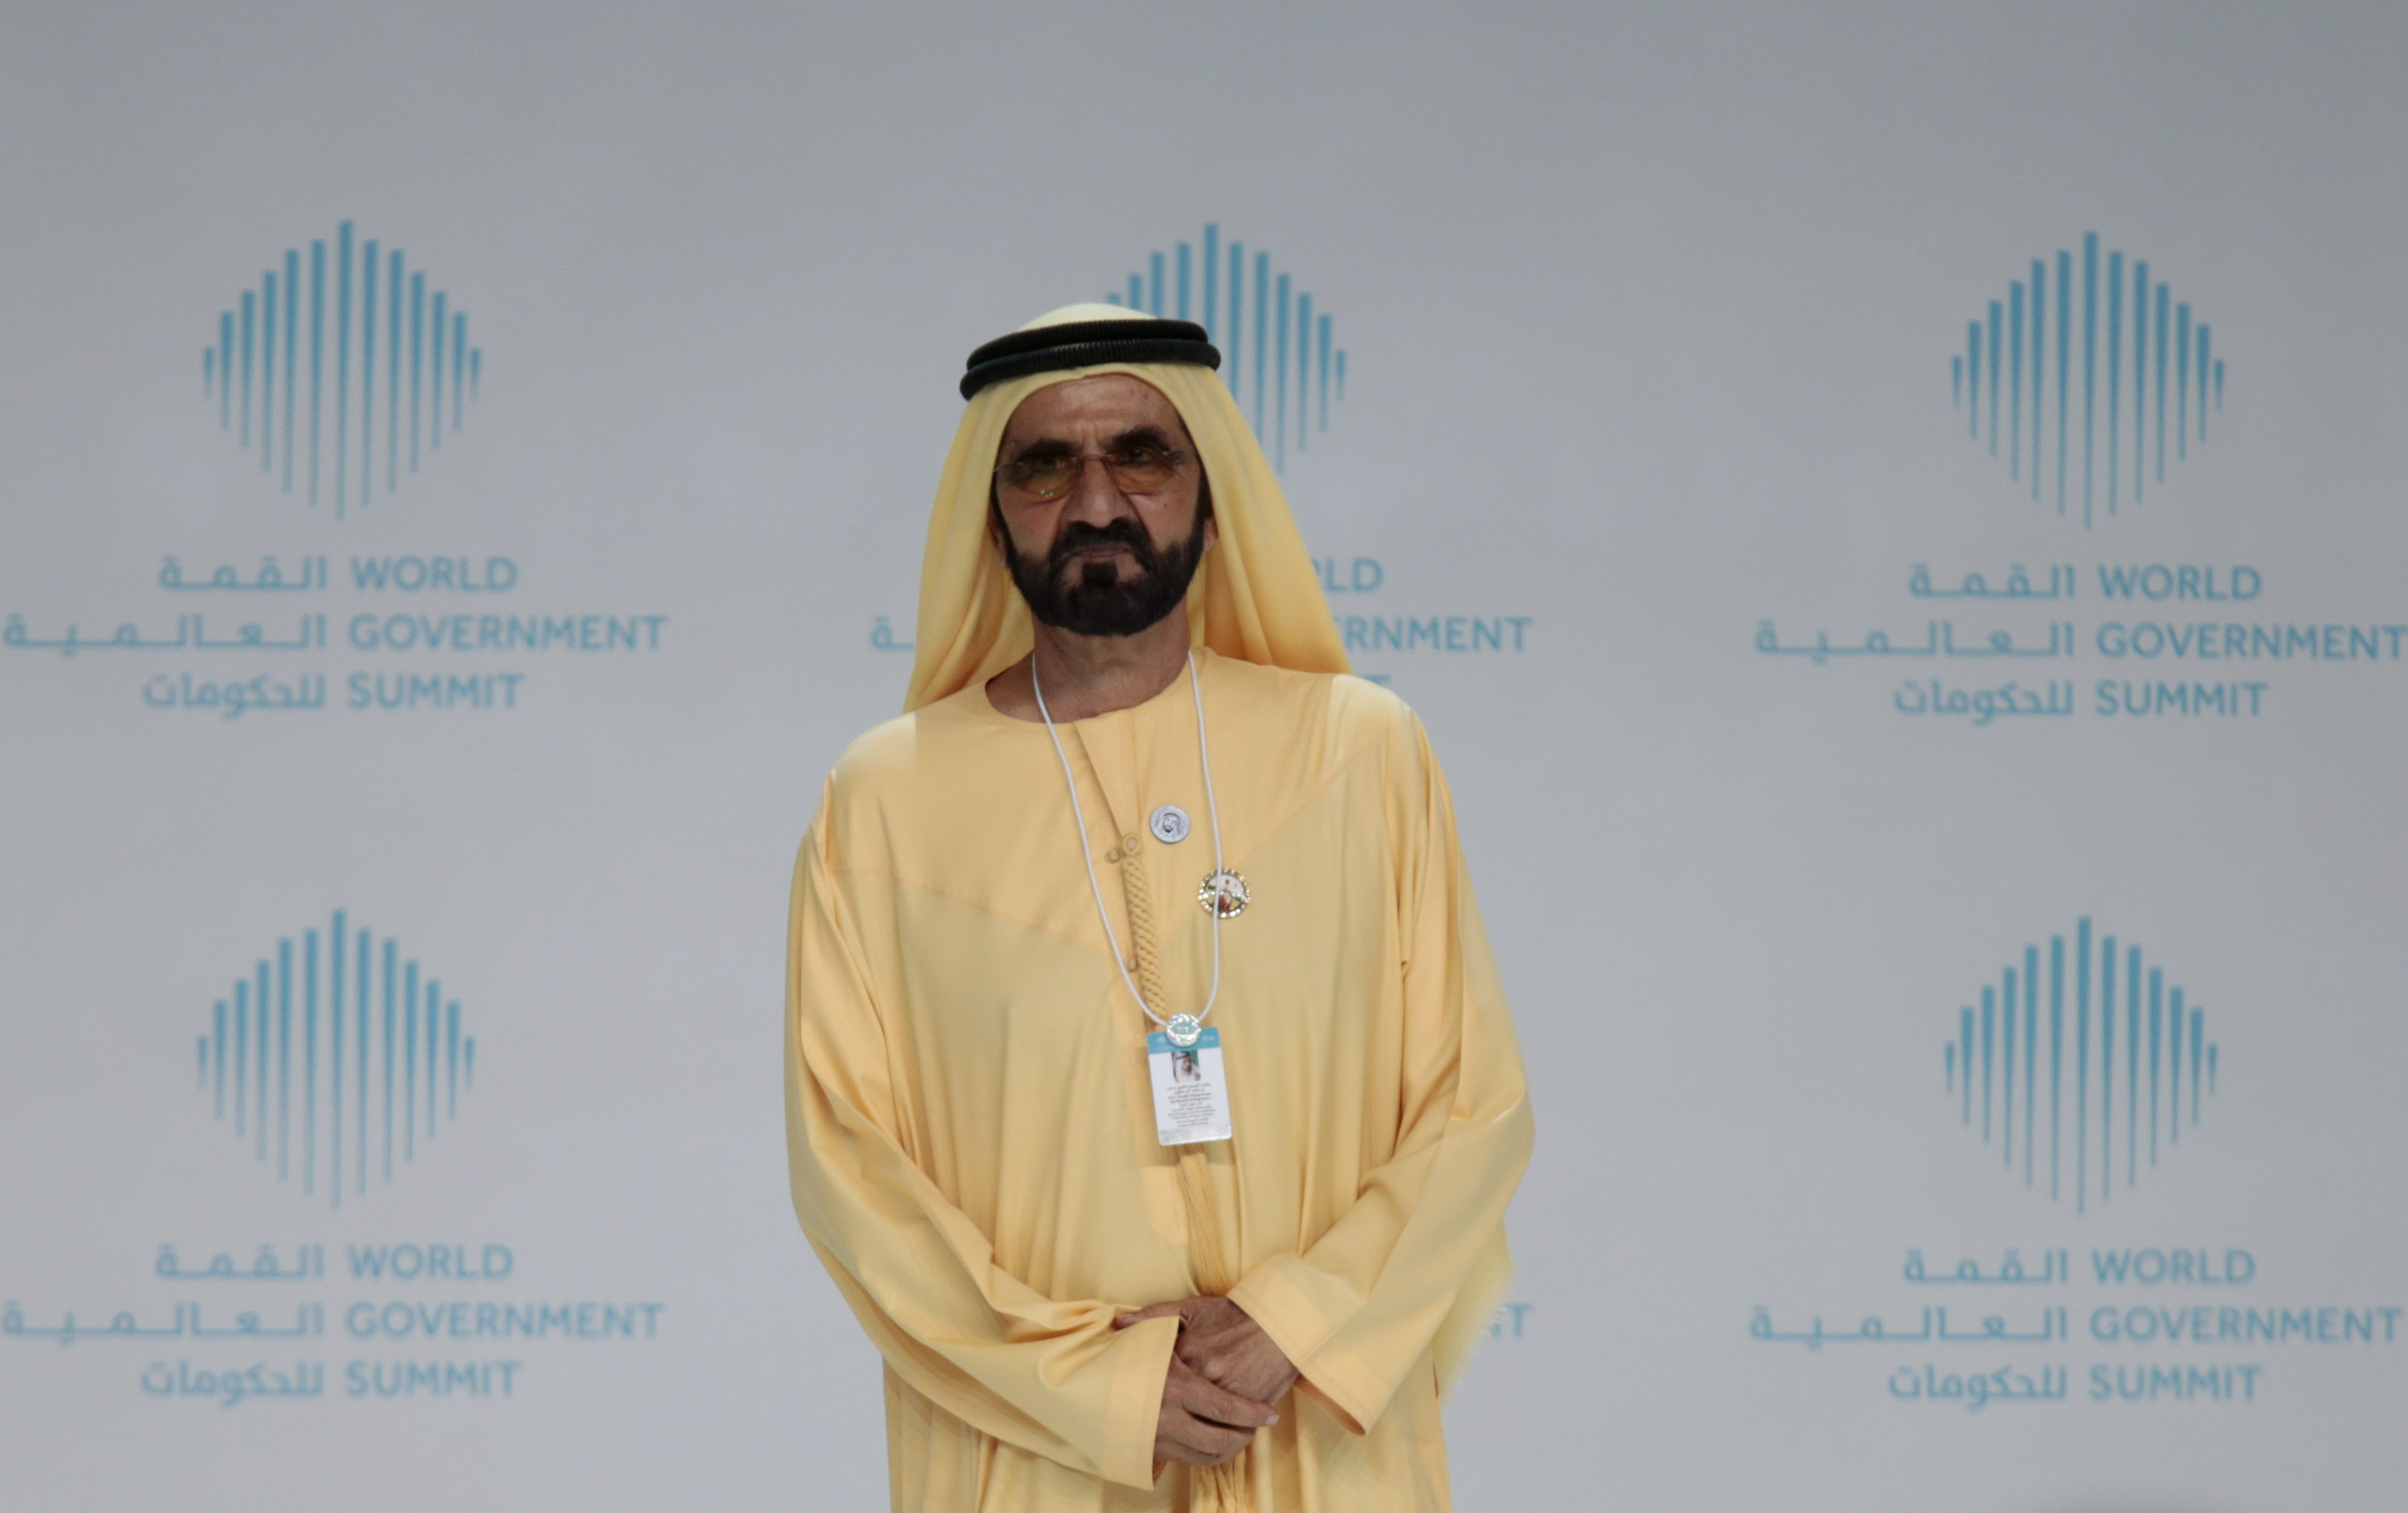 Sheikh Mohammed bin Rashid al-Maktoum, Prime Minister and Vice-President of the United Arab Emirates, and ruler of Dubai, attends the World Government Summit in Dubai